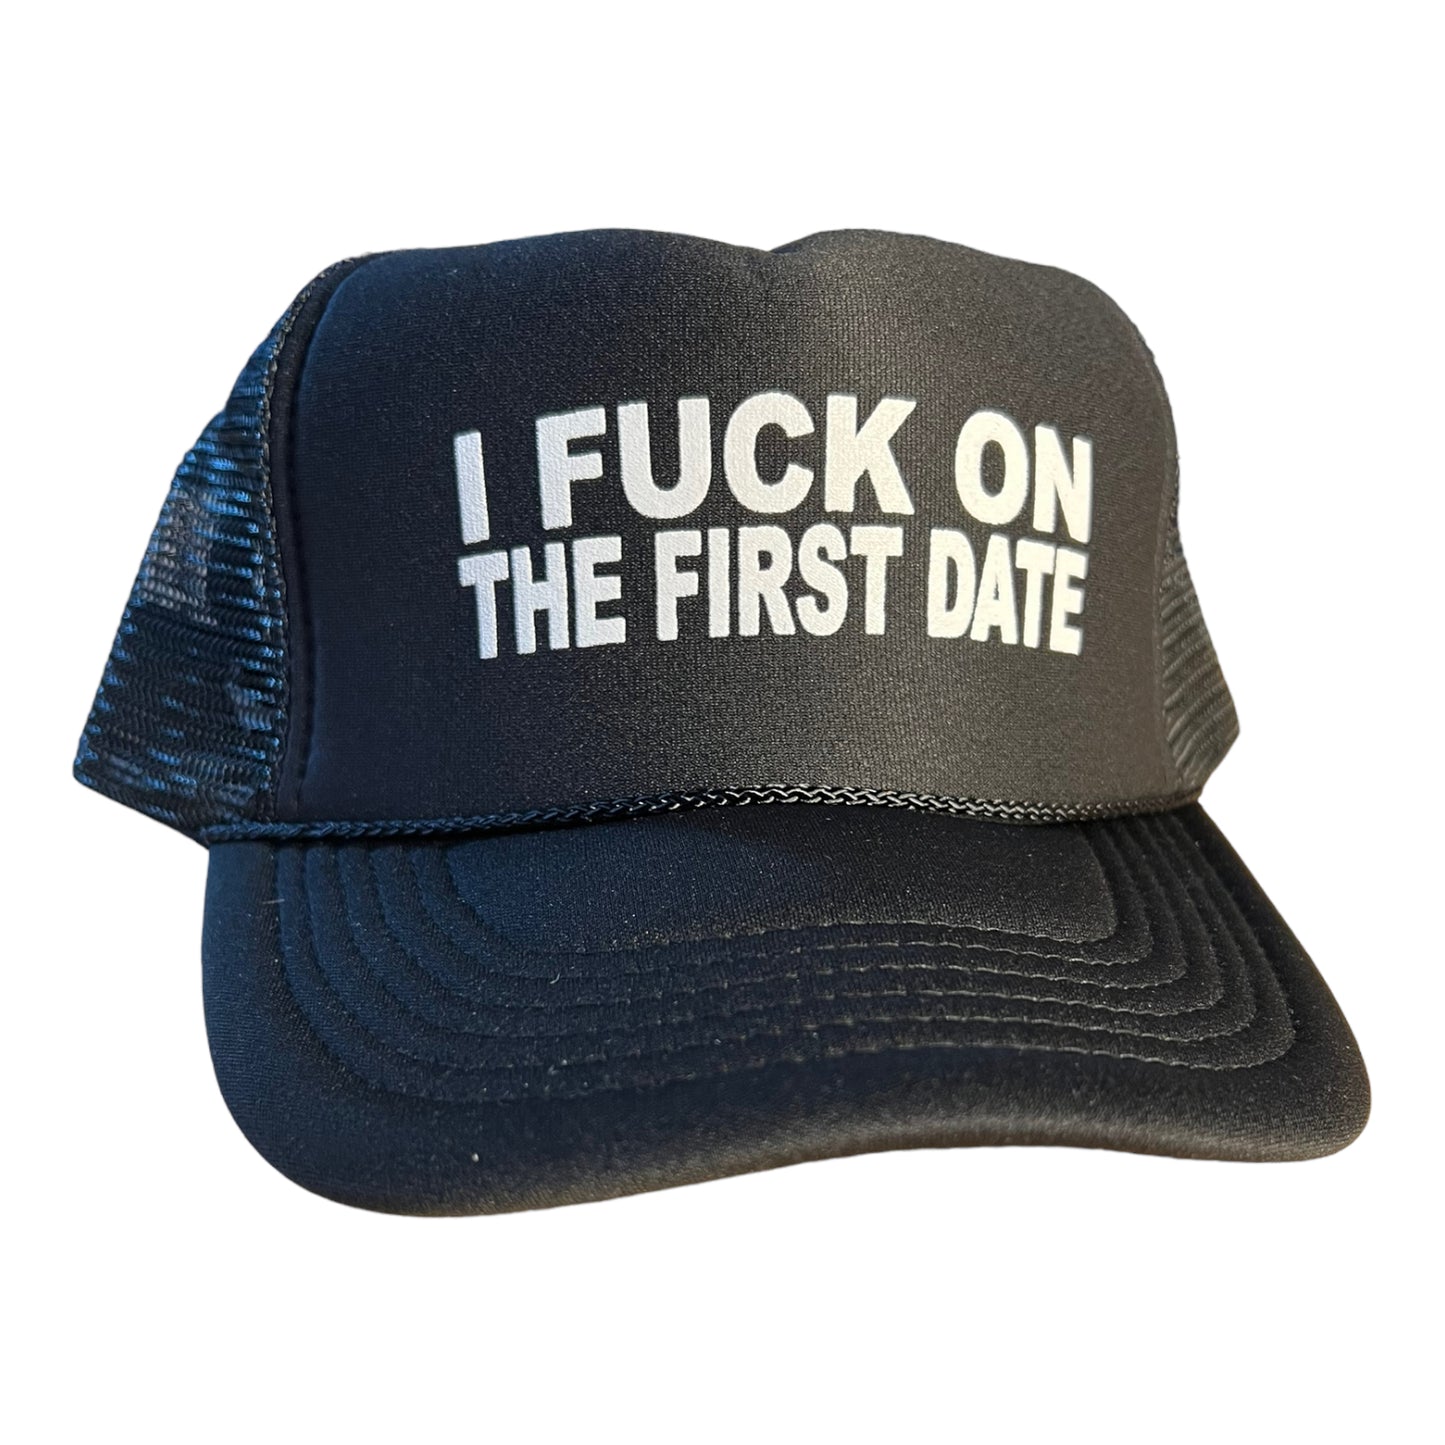 I F*CK On The First Date Trucker Hat Funny Trucker Hat Black